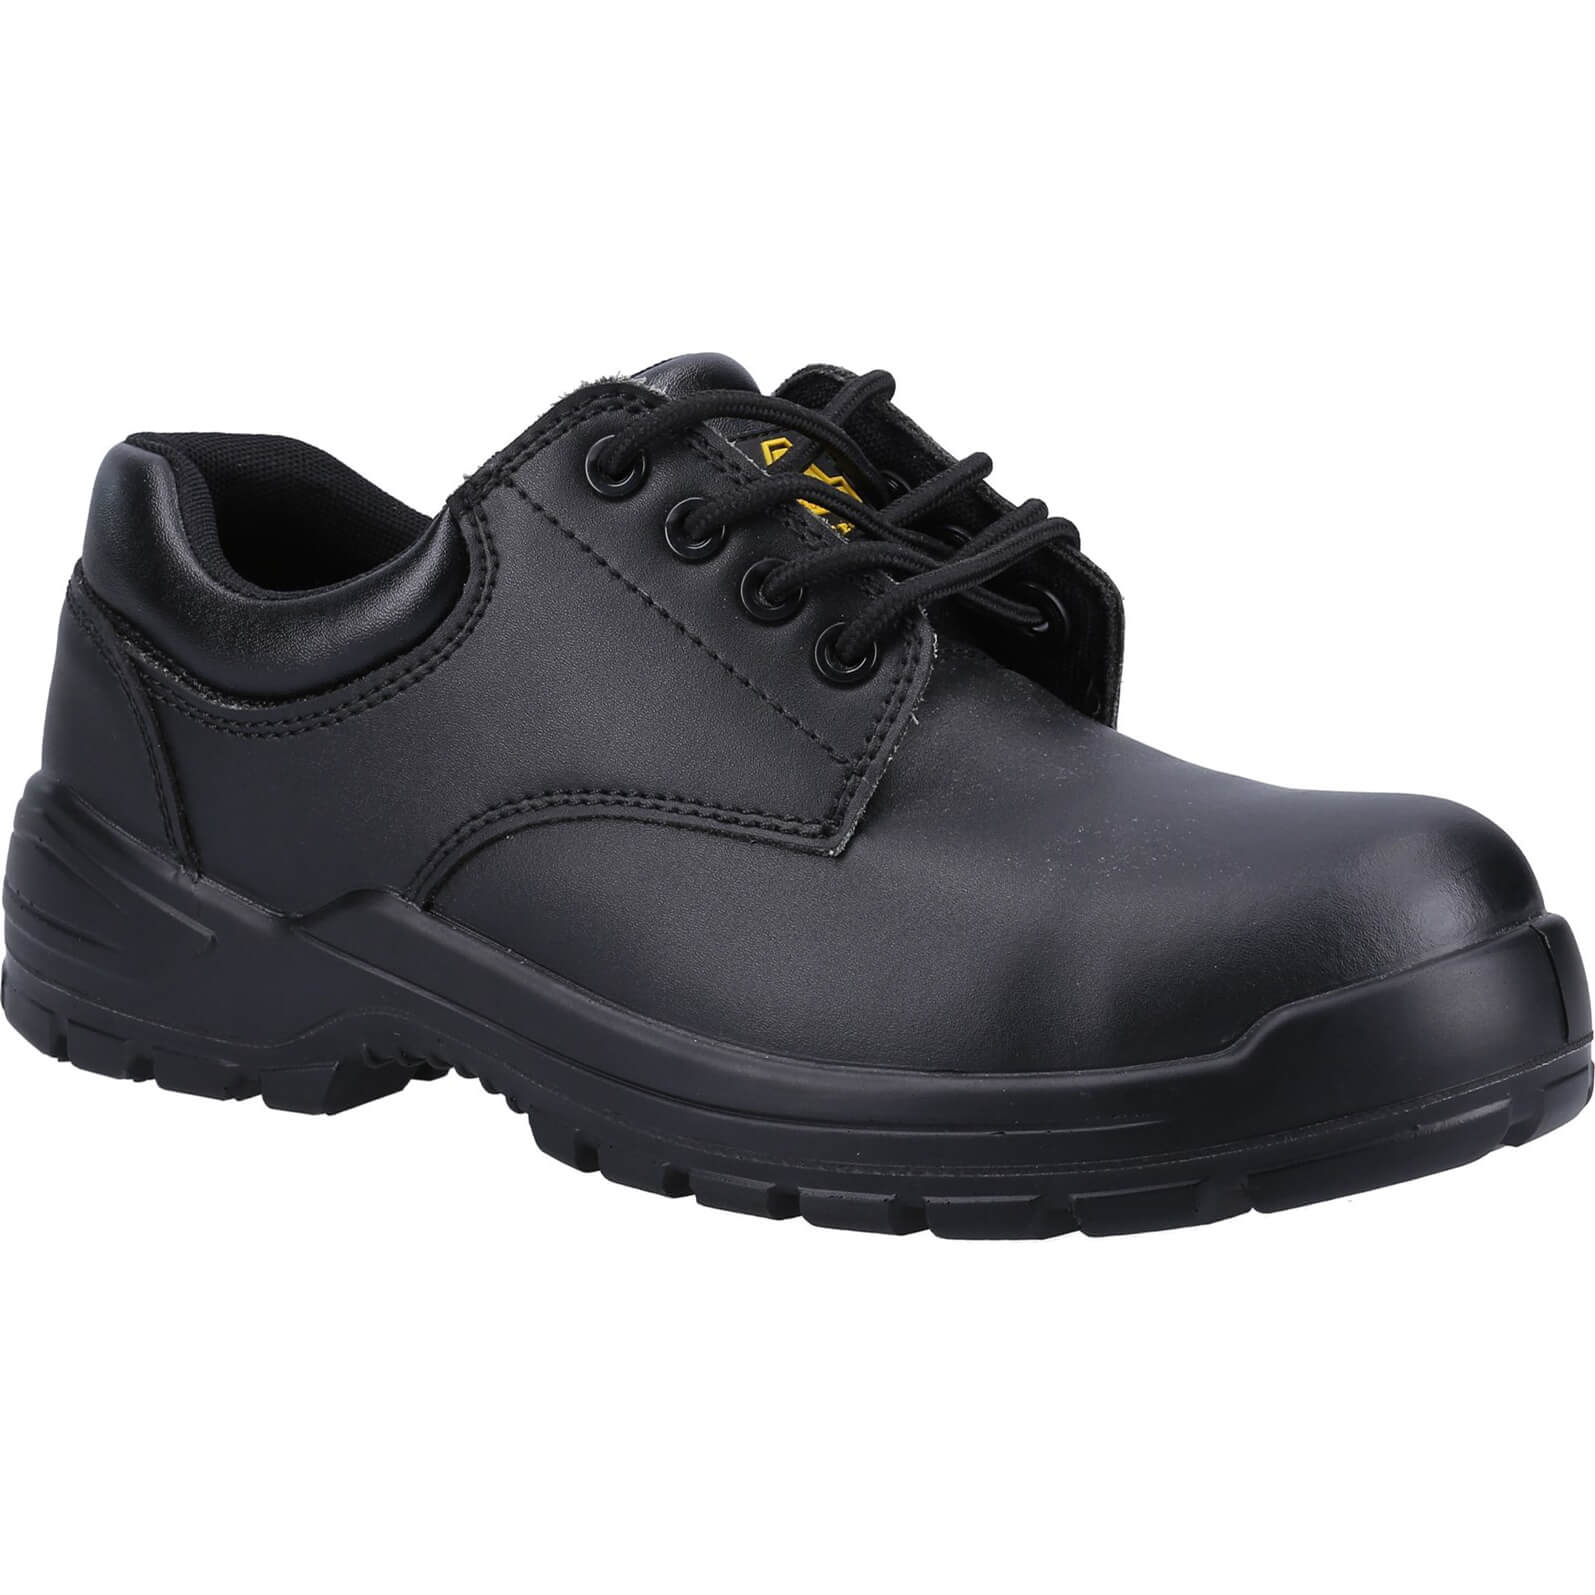 Image of Amblers Safety FS38C Metal Free Composite Gibson Lace Safety Shoe Black Size 6